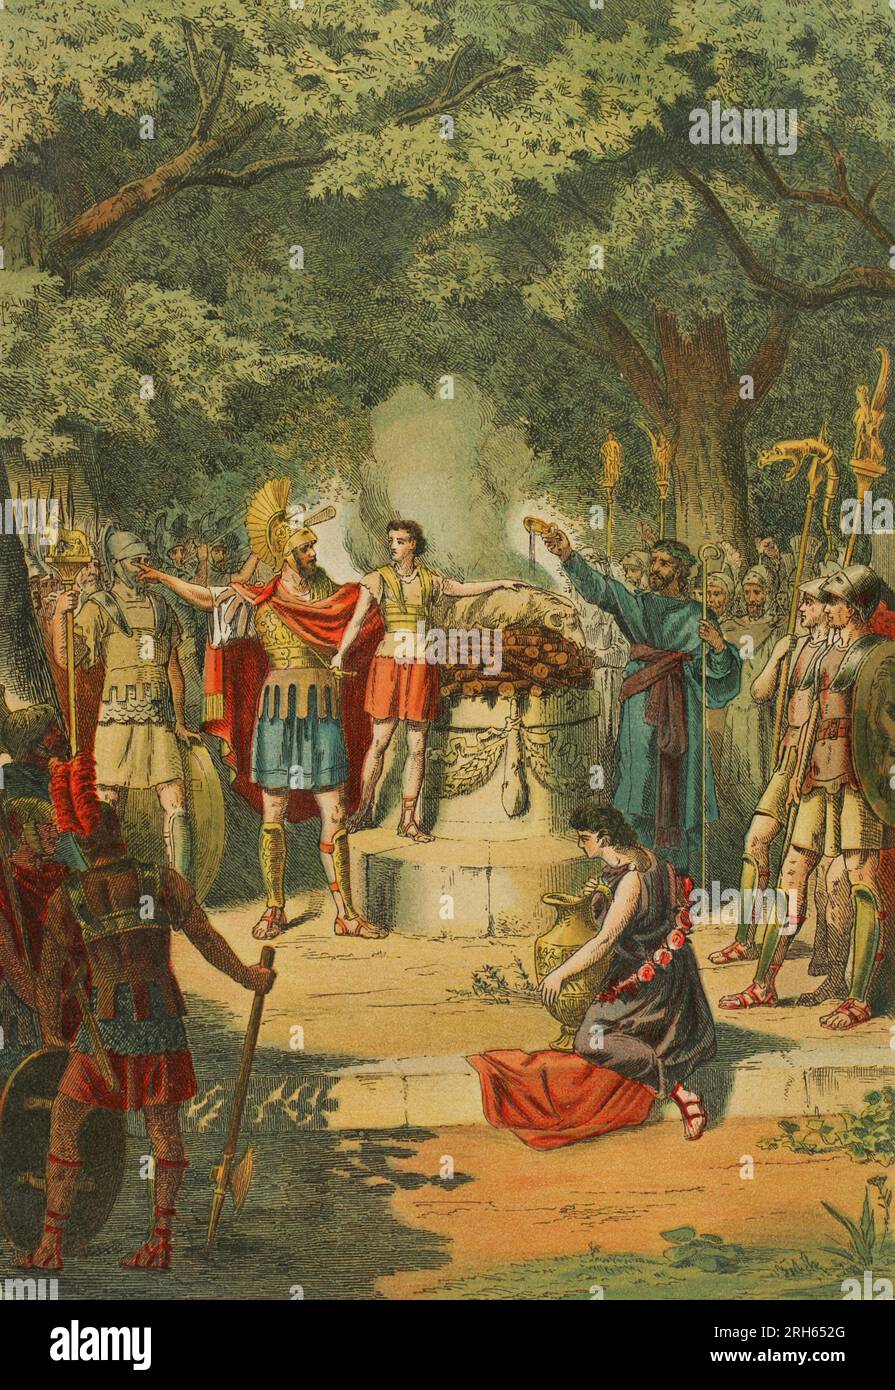 Hannibal Barca (247-183 BC). Carthaginian general and statesman. Hannibal in the Temple of Carthage with his father Hamilcar Barca, at the age of nine, taking an oath of eternal hatred of Rome by dipping his hands in the blood of the sacrificed animal. Chromolithography. 'Historia Universal', by Cesar Cantu. Volume II, 1881. Stock Photo